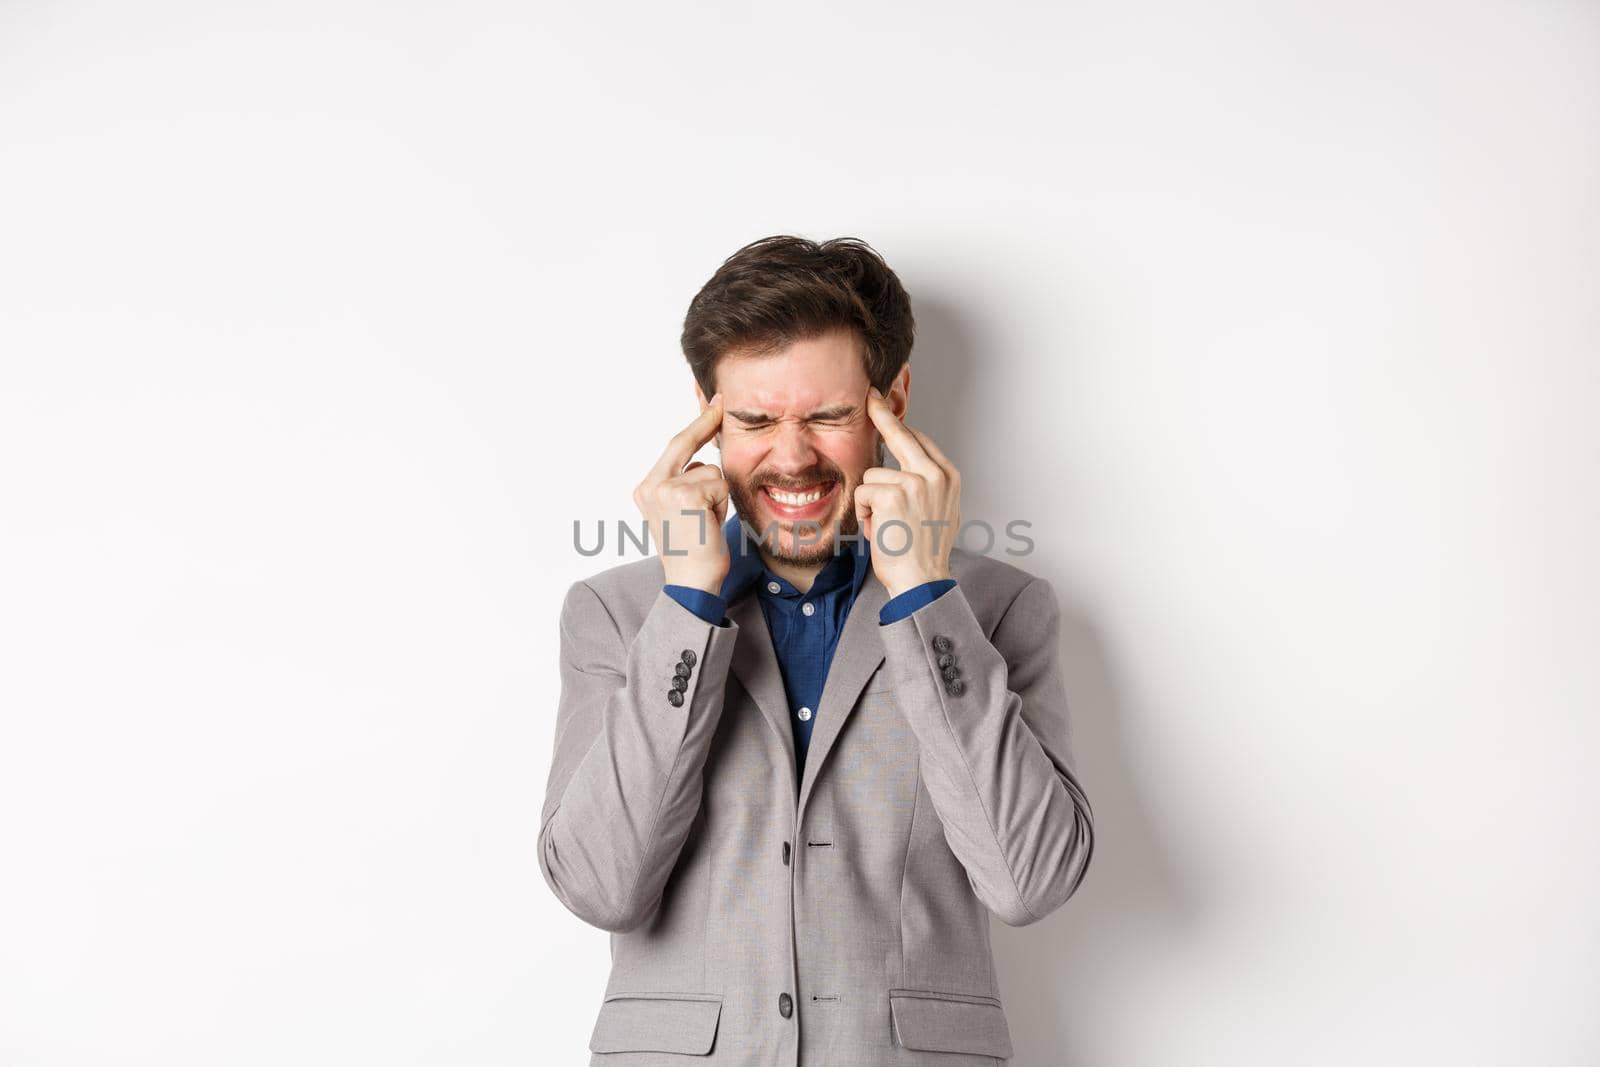 Image of frustrated man trying to think, cant remember something, touching head temples and squinting with tensed grimace, brainstorming, searching solution, white background.